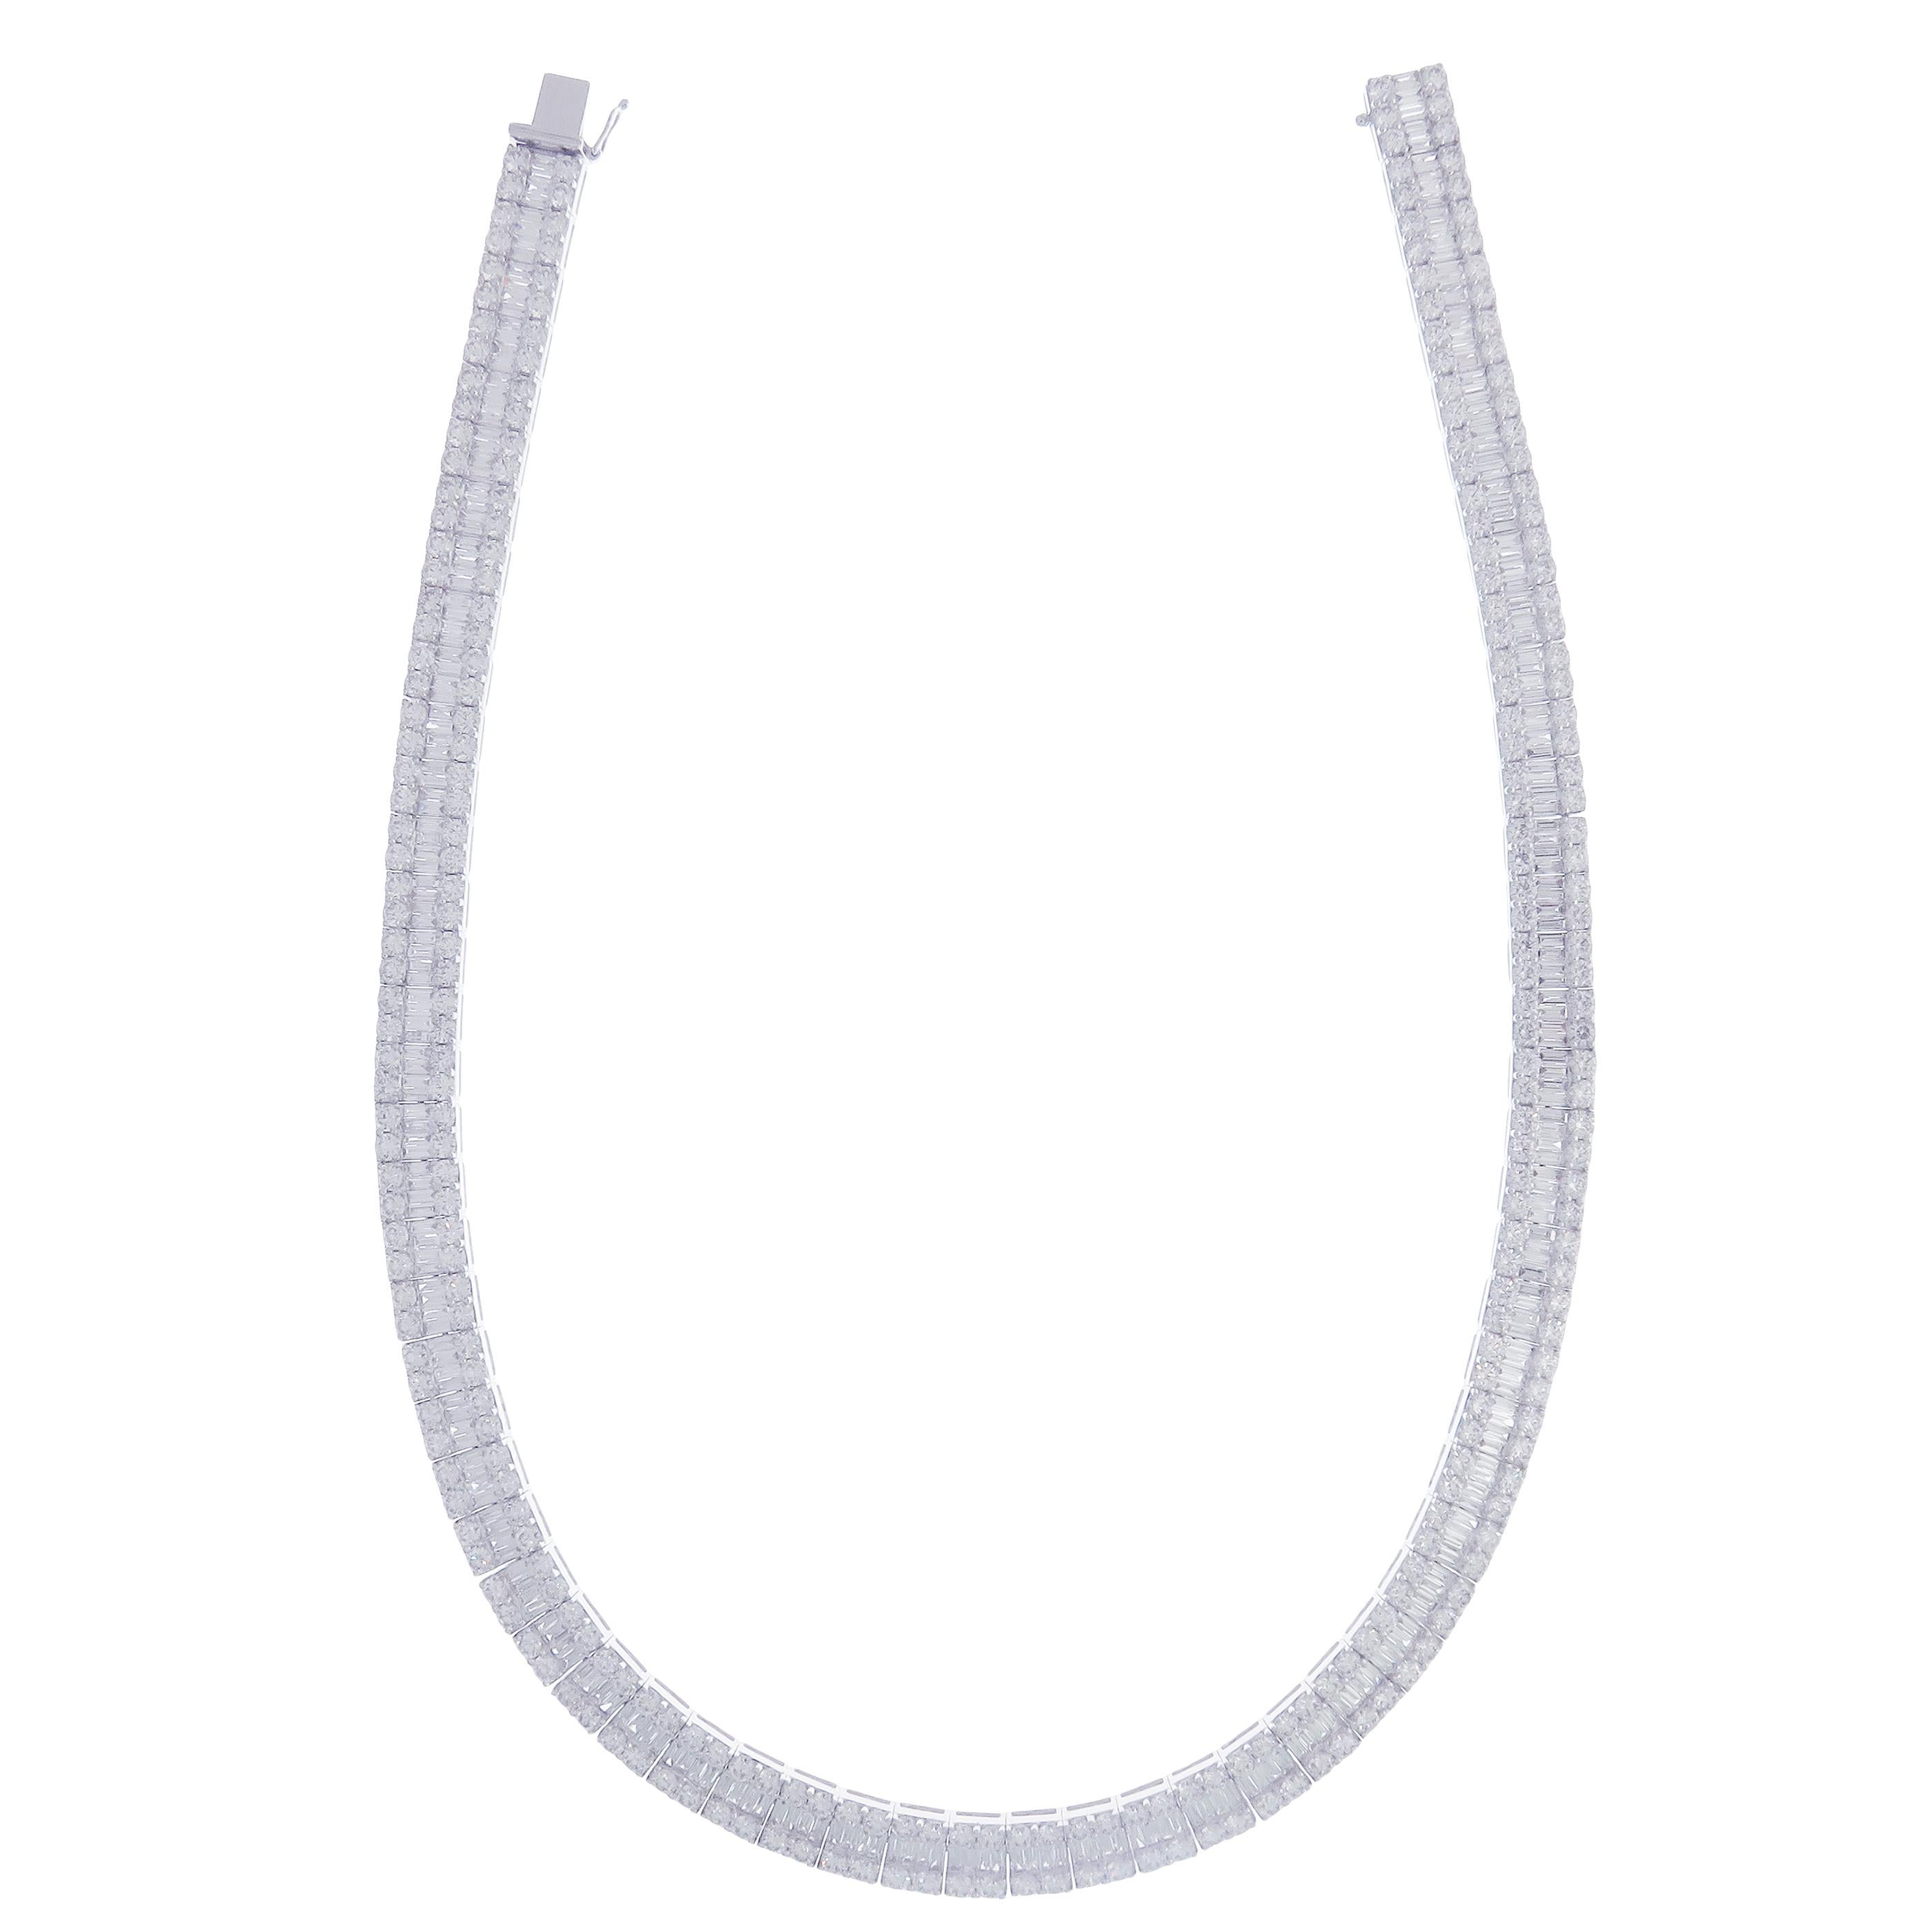 This line collection baguette necklace is crafted in 18-karat white gold, weighing approximately 34.53 total carats of V Quality white diamond. These are very comfortable, flexible, and lay flat. We have these in matching earrings as well.